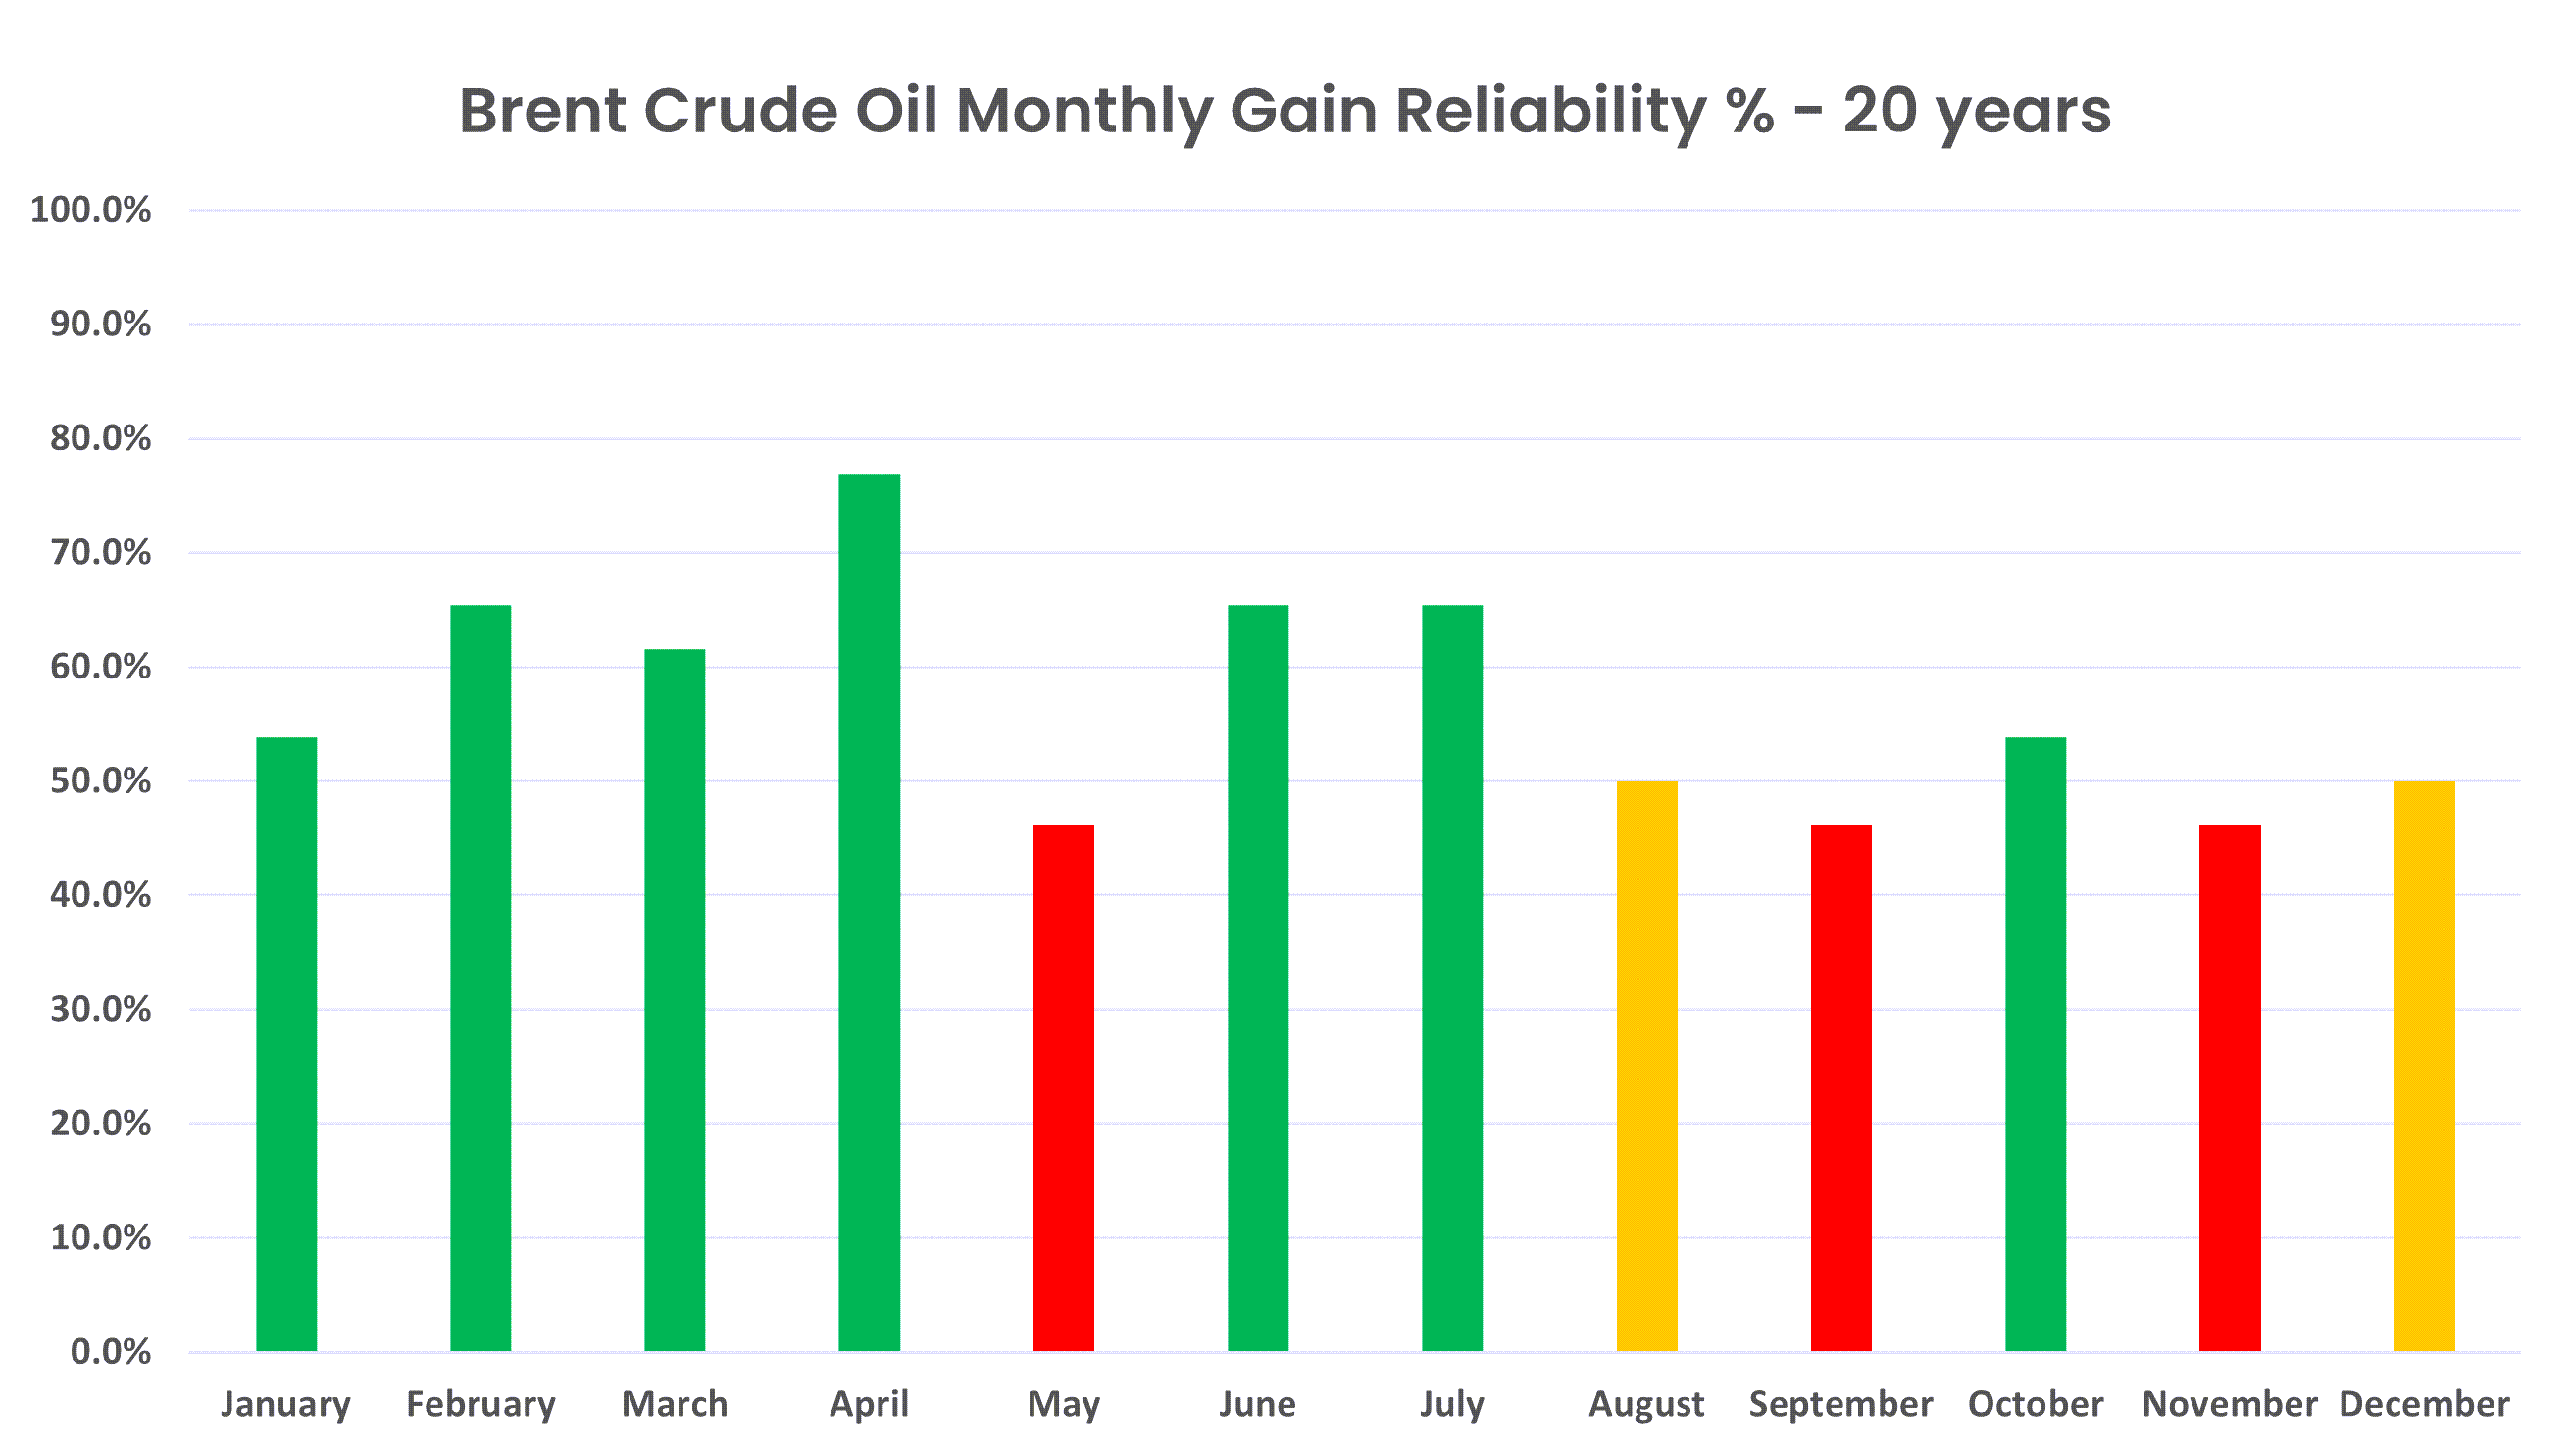 Brent Crude Oil Monthly Gain Reliability last 20 Years